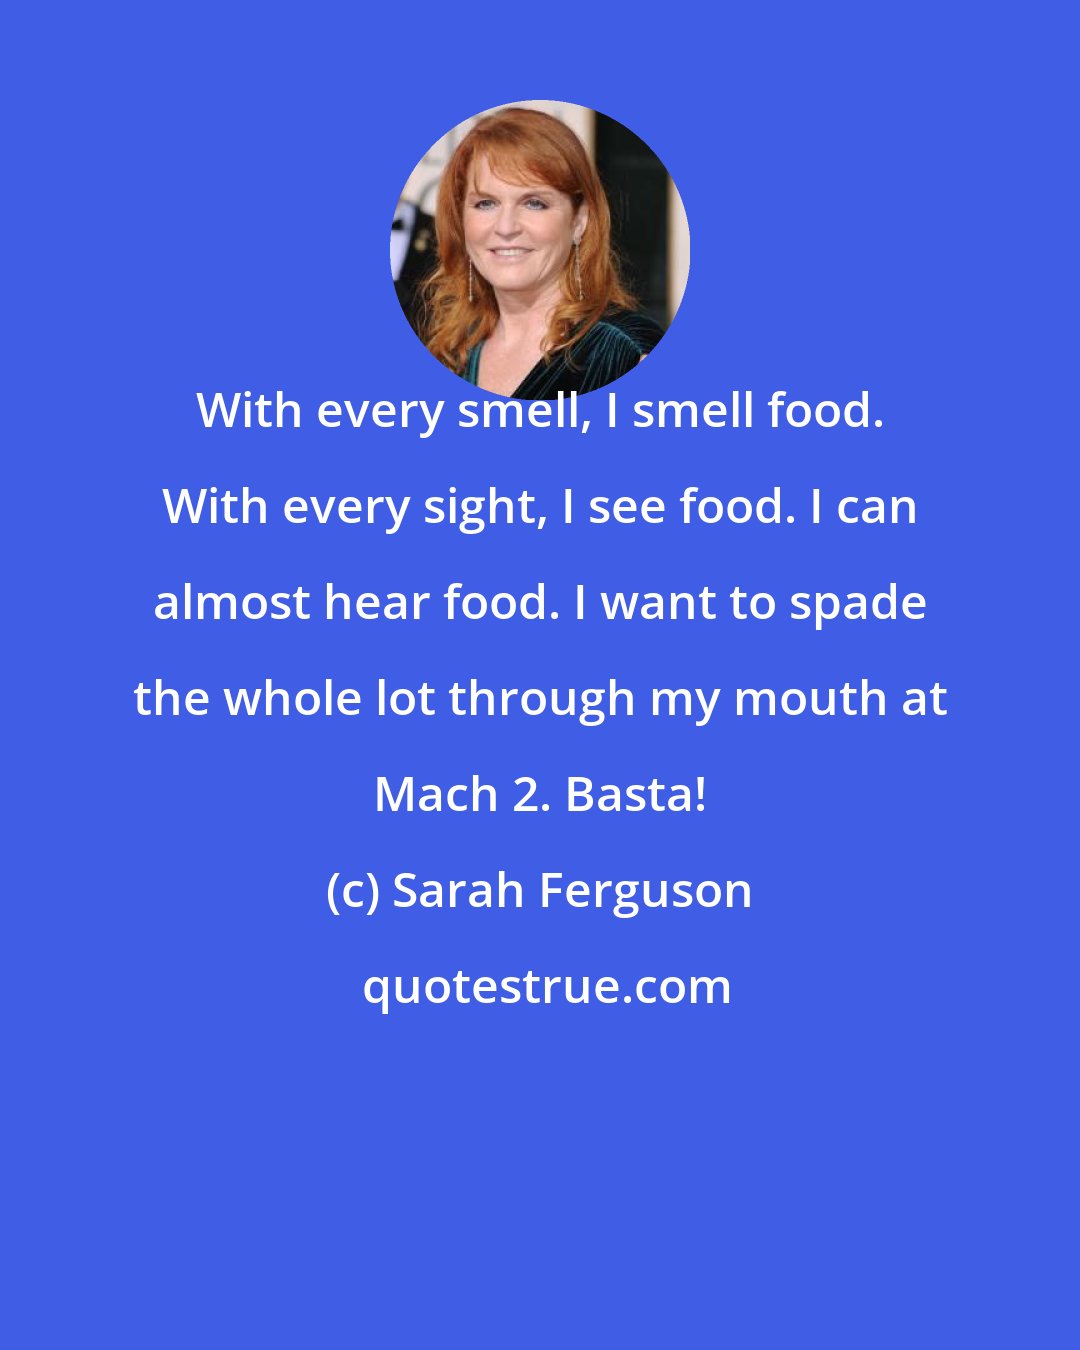 Sarah Ferguson: With every smell, I smell food. With every sight, I see food. I can almost hear food. I want to spade the whole lot through my mouth at Mach 2. Basta!